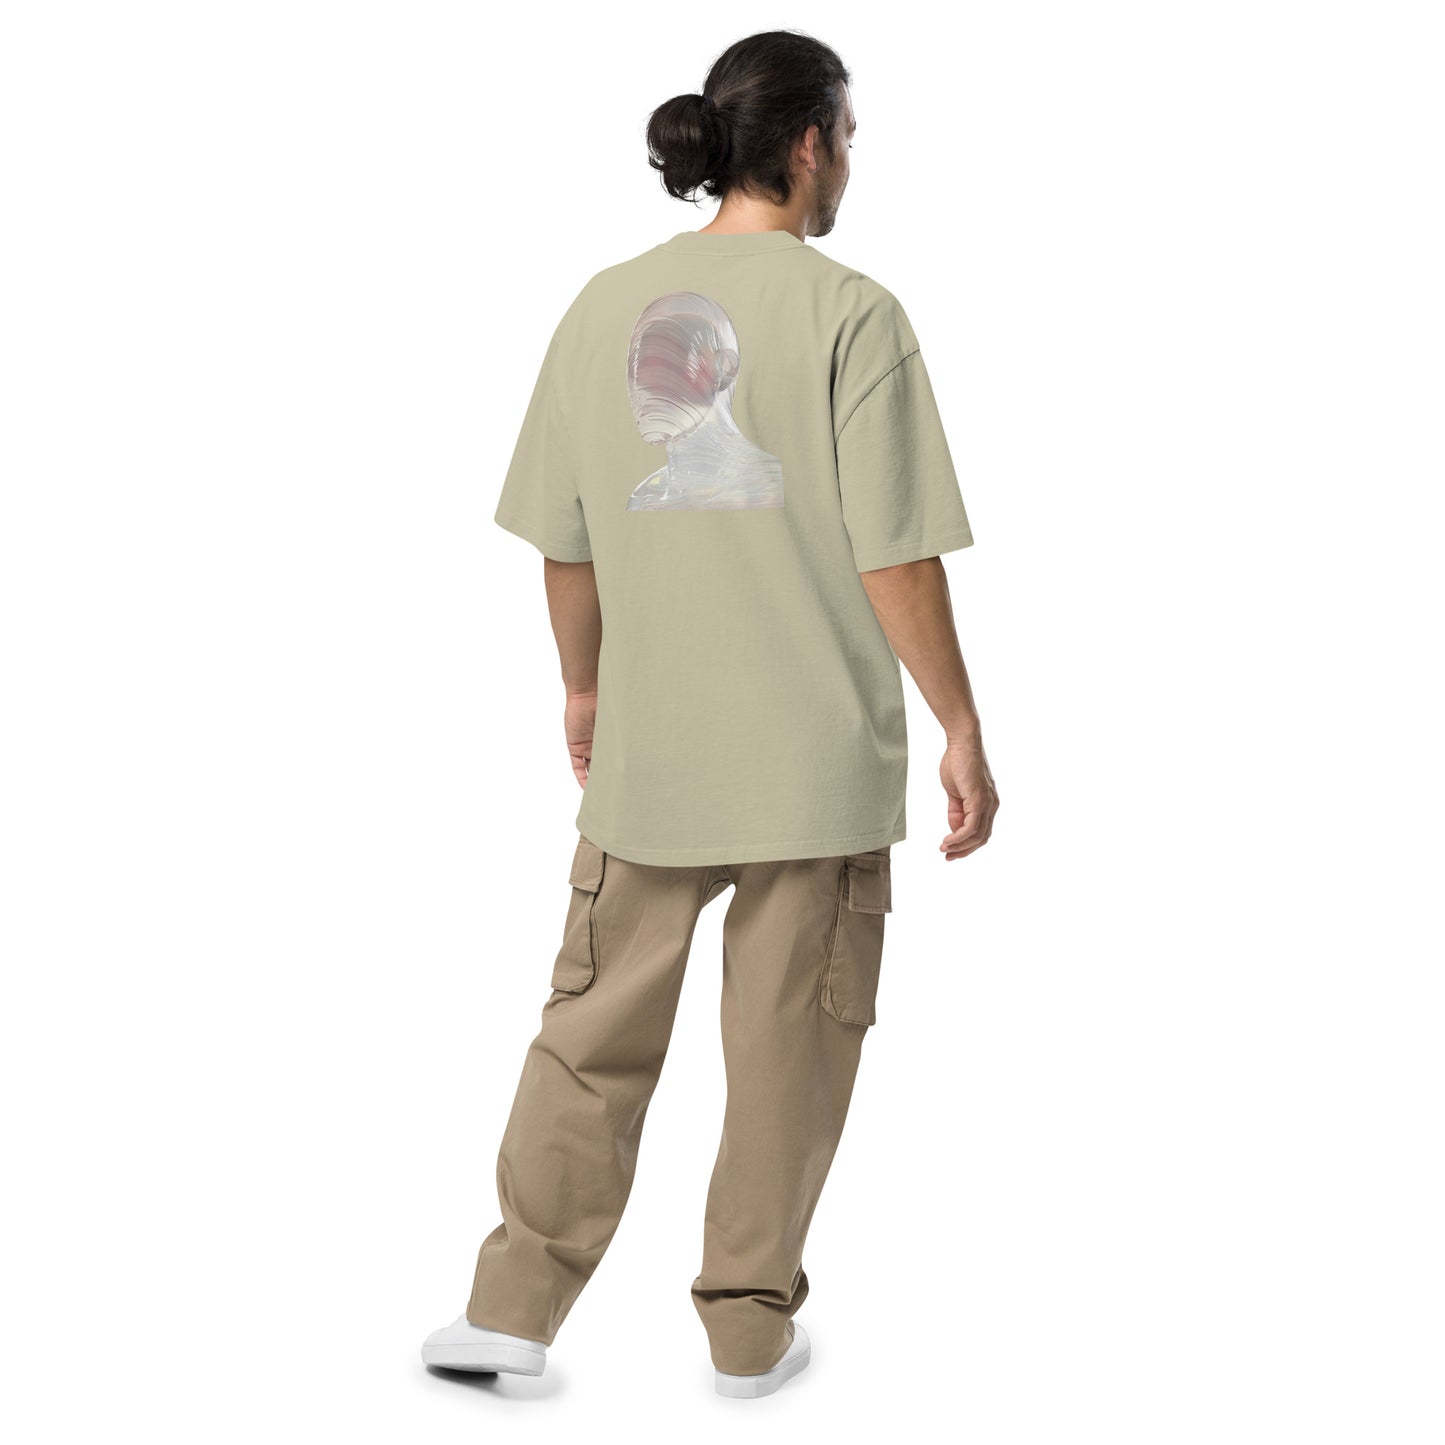 Faded Oversized Tee with Intriguing Woman Brain Graphic | ONLYZ3AL